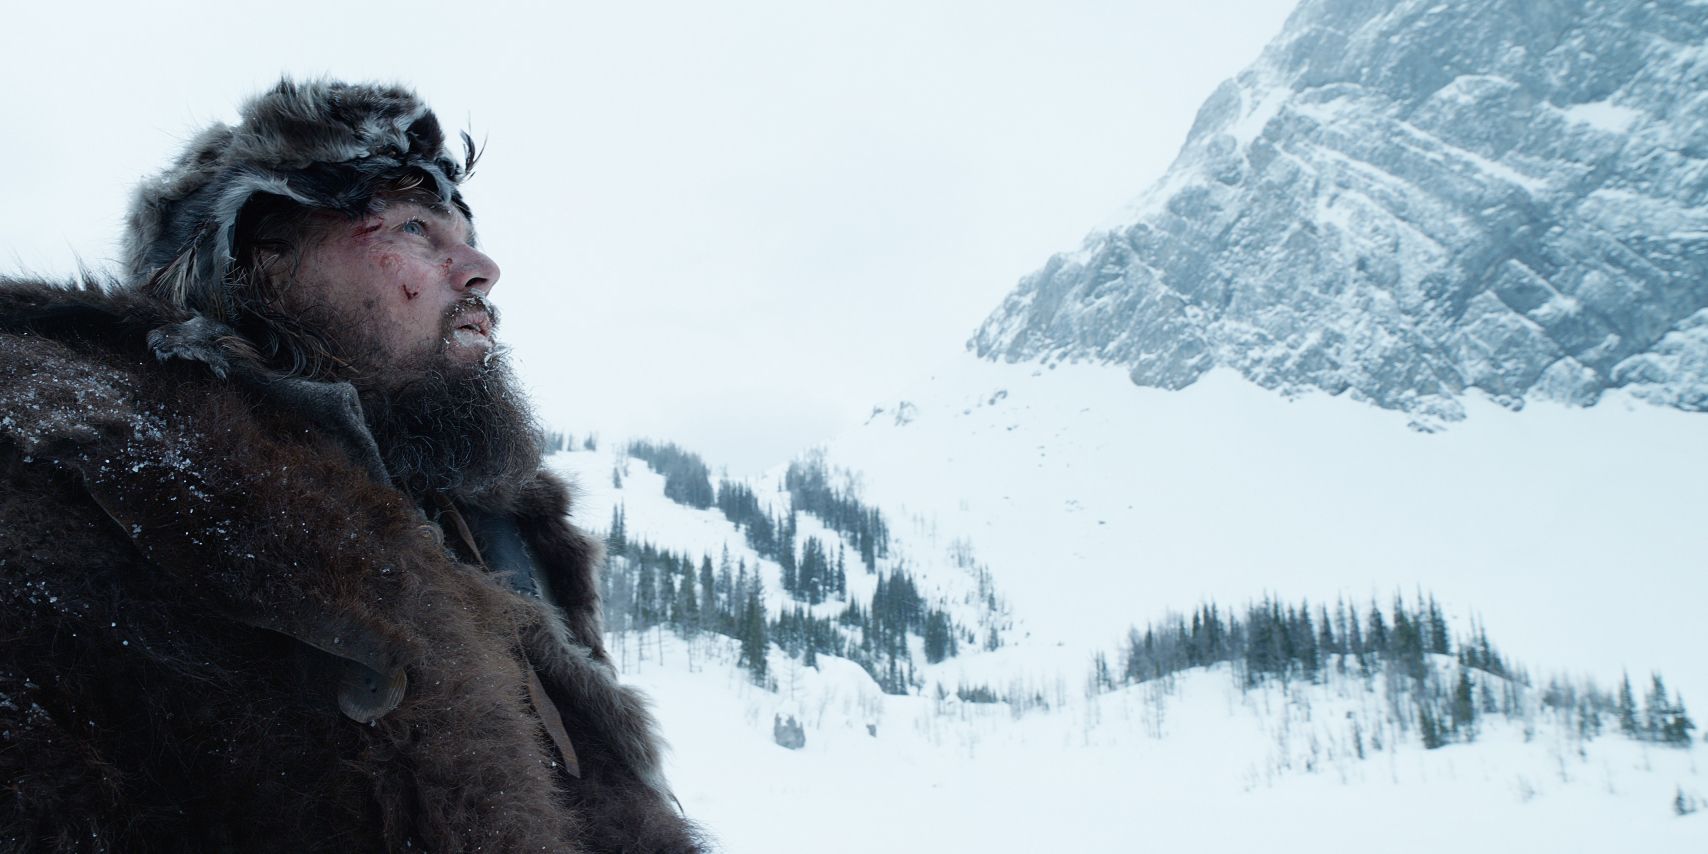 Leonardo Dicaprio looks at the sky with a snowy mountain in the background in The Revenant.